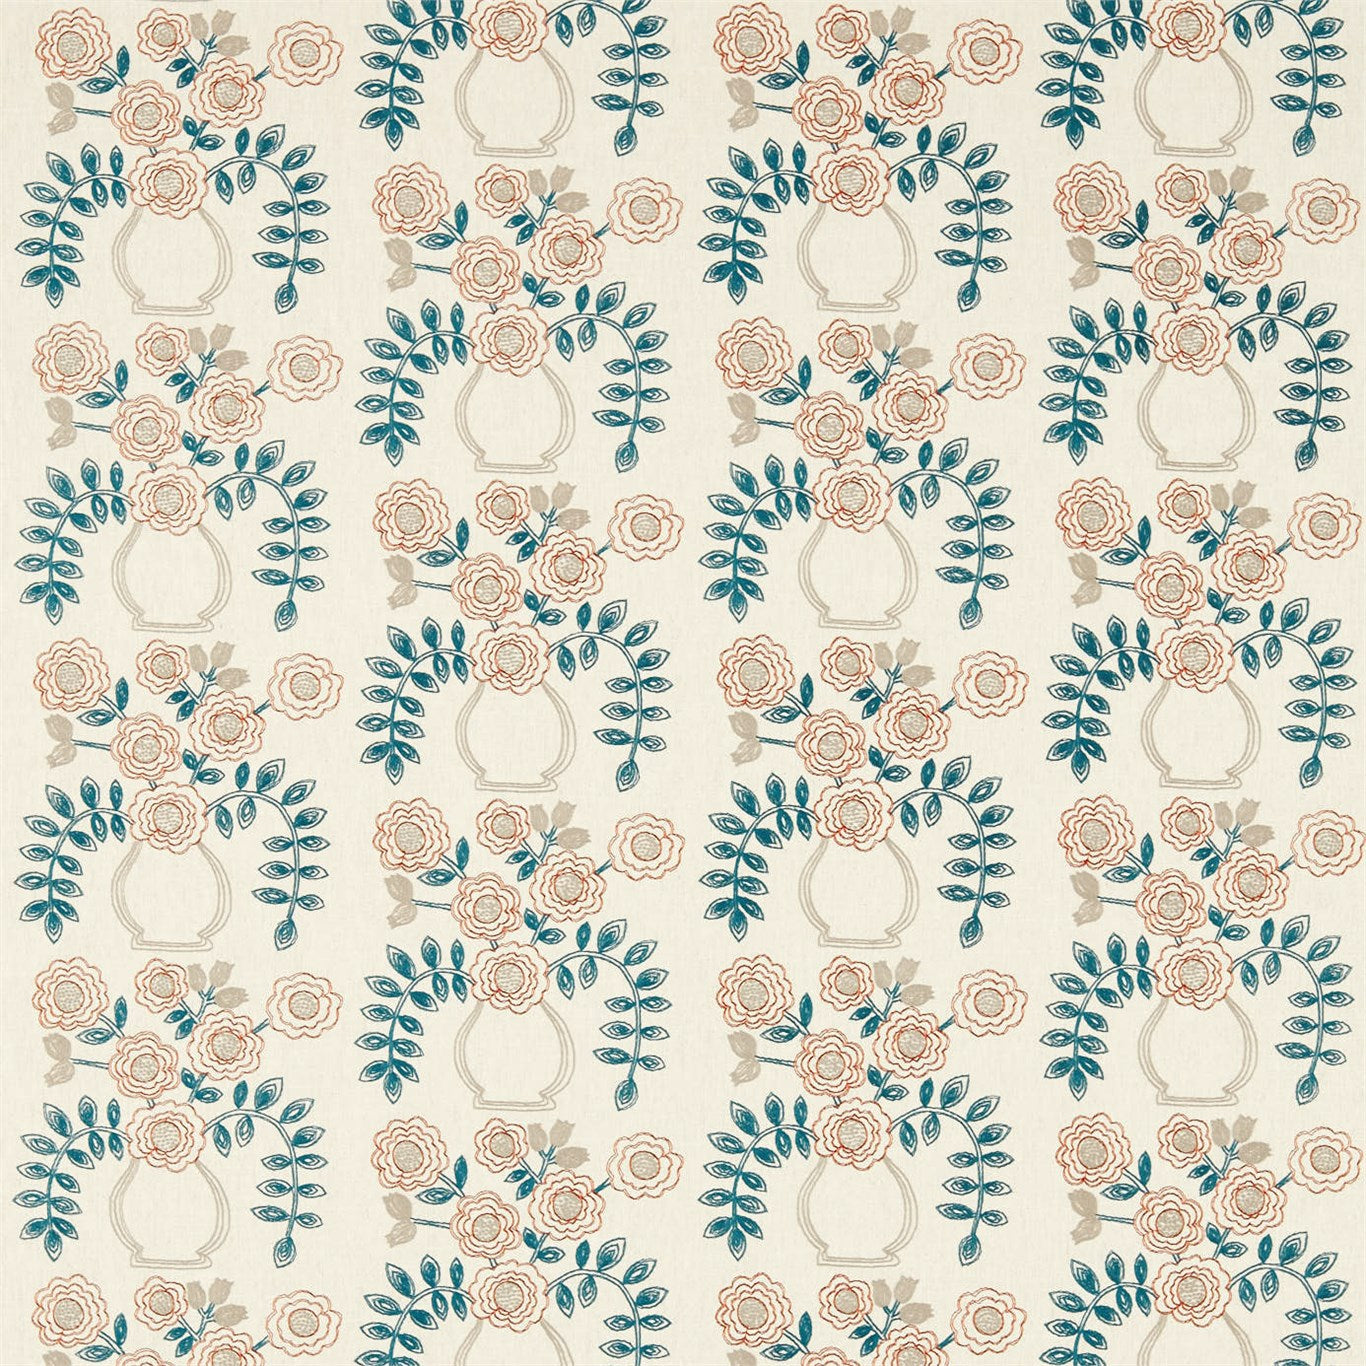 Flower Pot Fabric by Sanderson Home